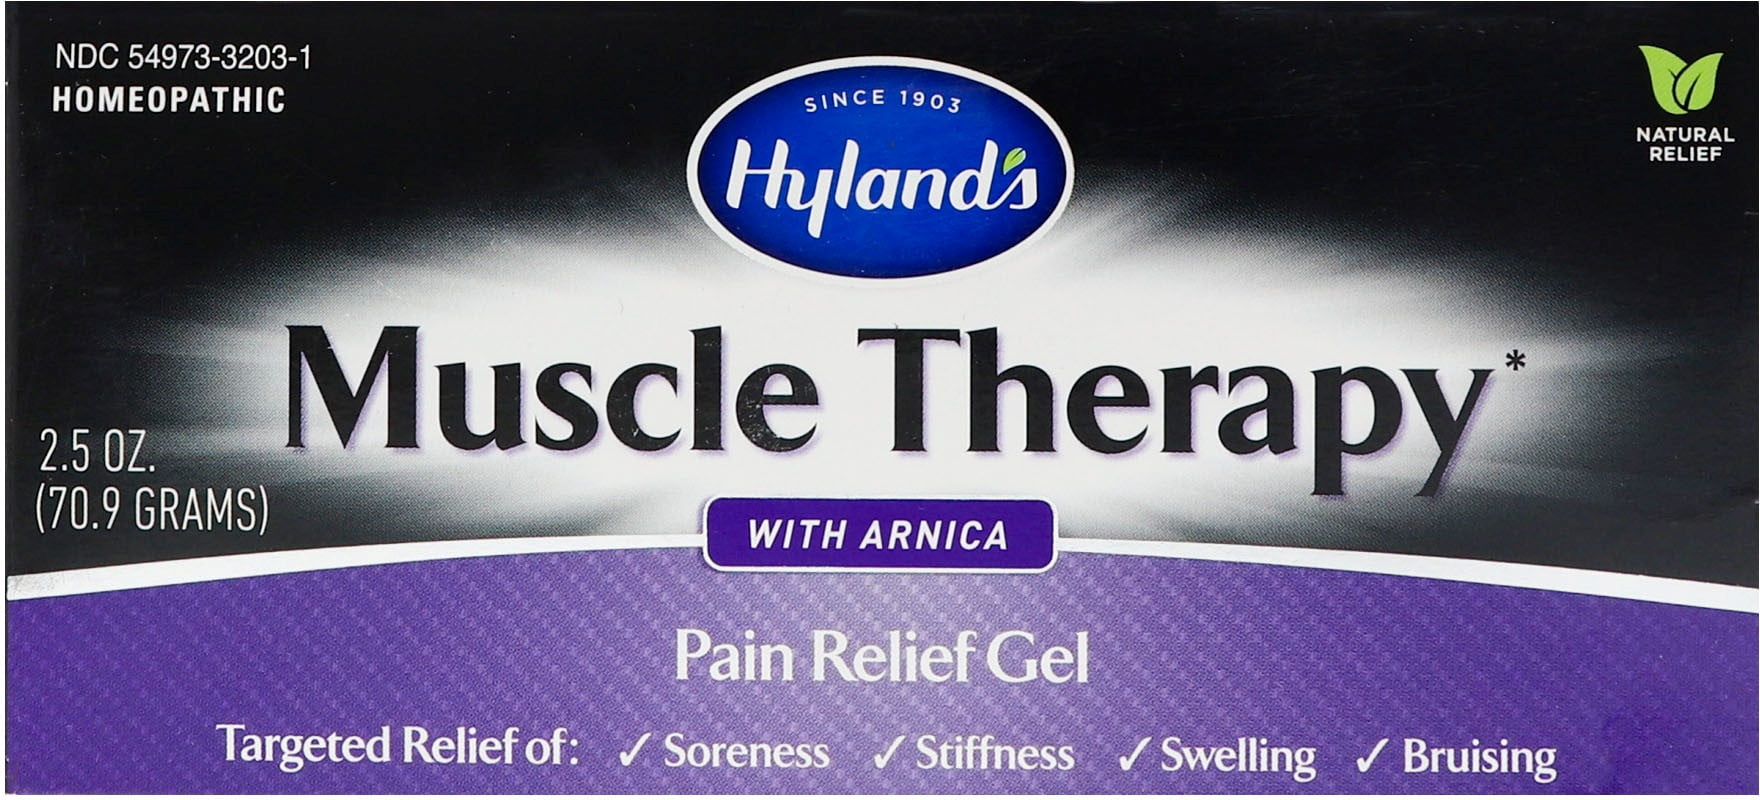 Muscle Therapy Gel with Arnica – Hyland's Naturals